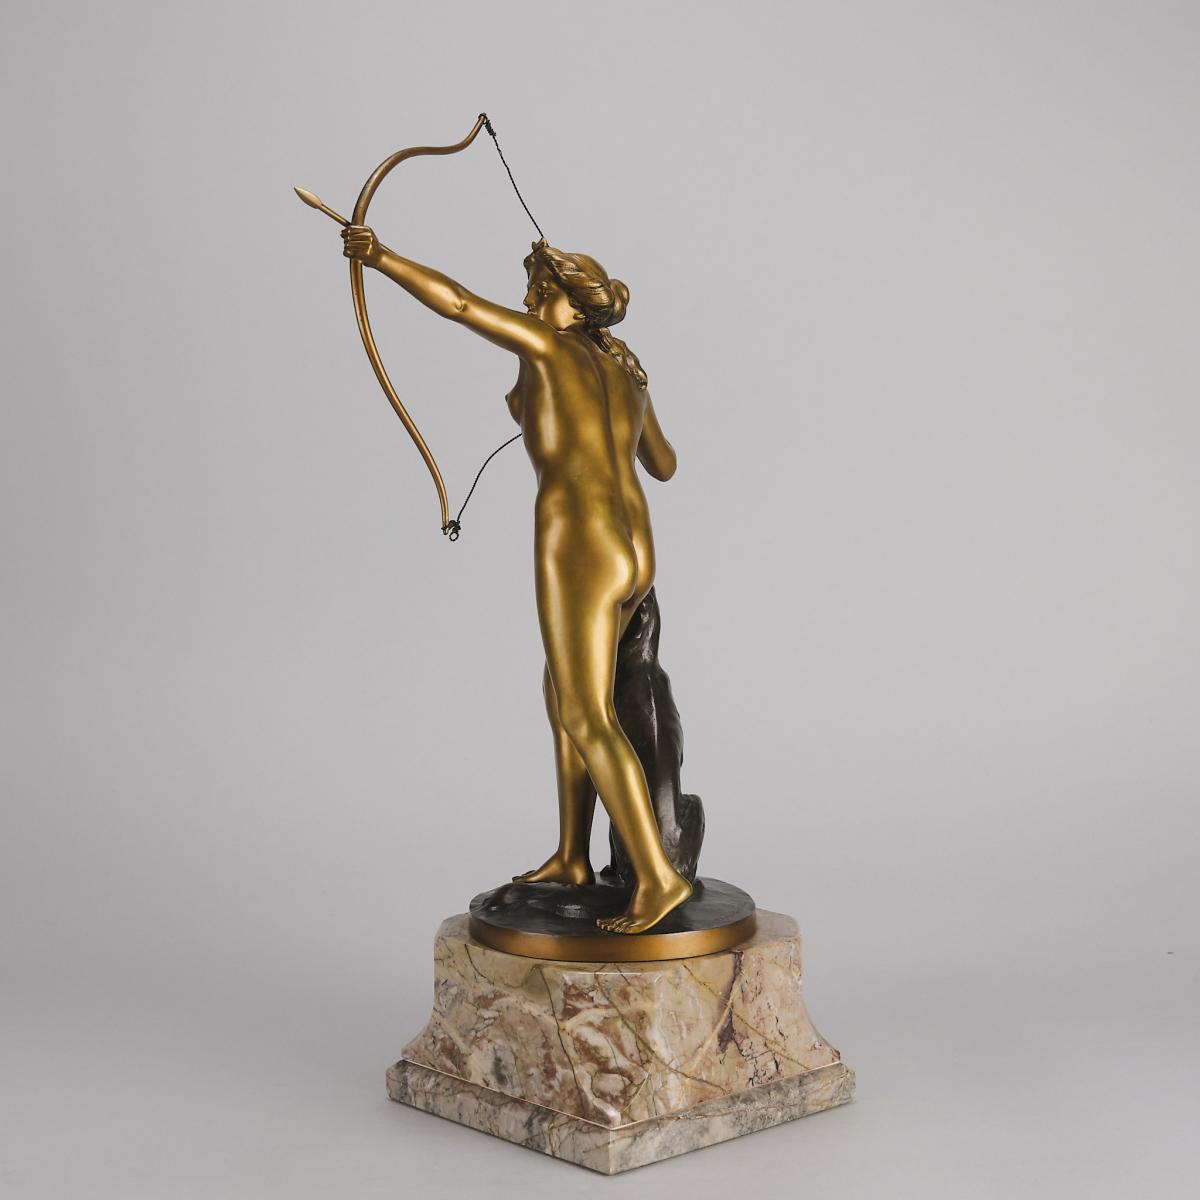 Cold-Painted Art Deco Bronze Sculpture entitled "Diana with Hounds" by Prof Poertzel